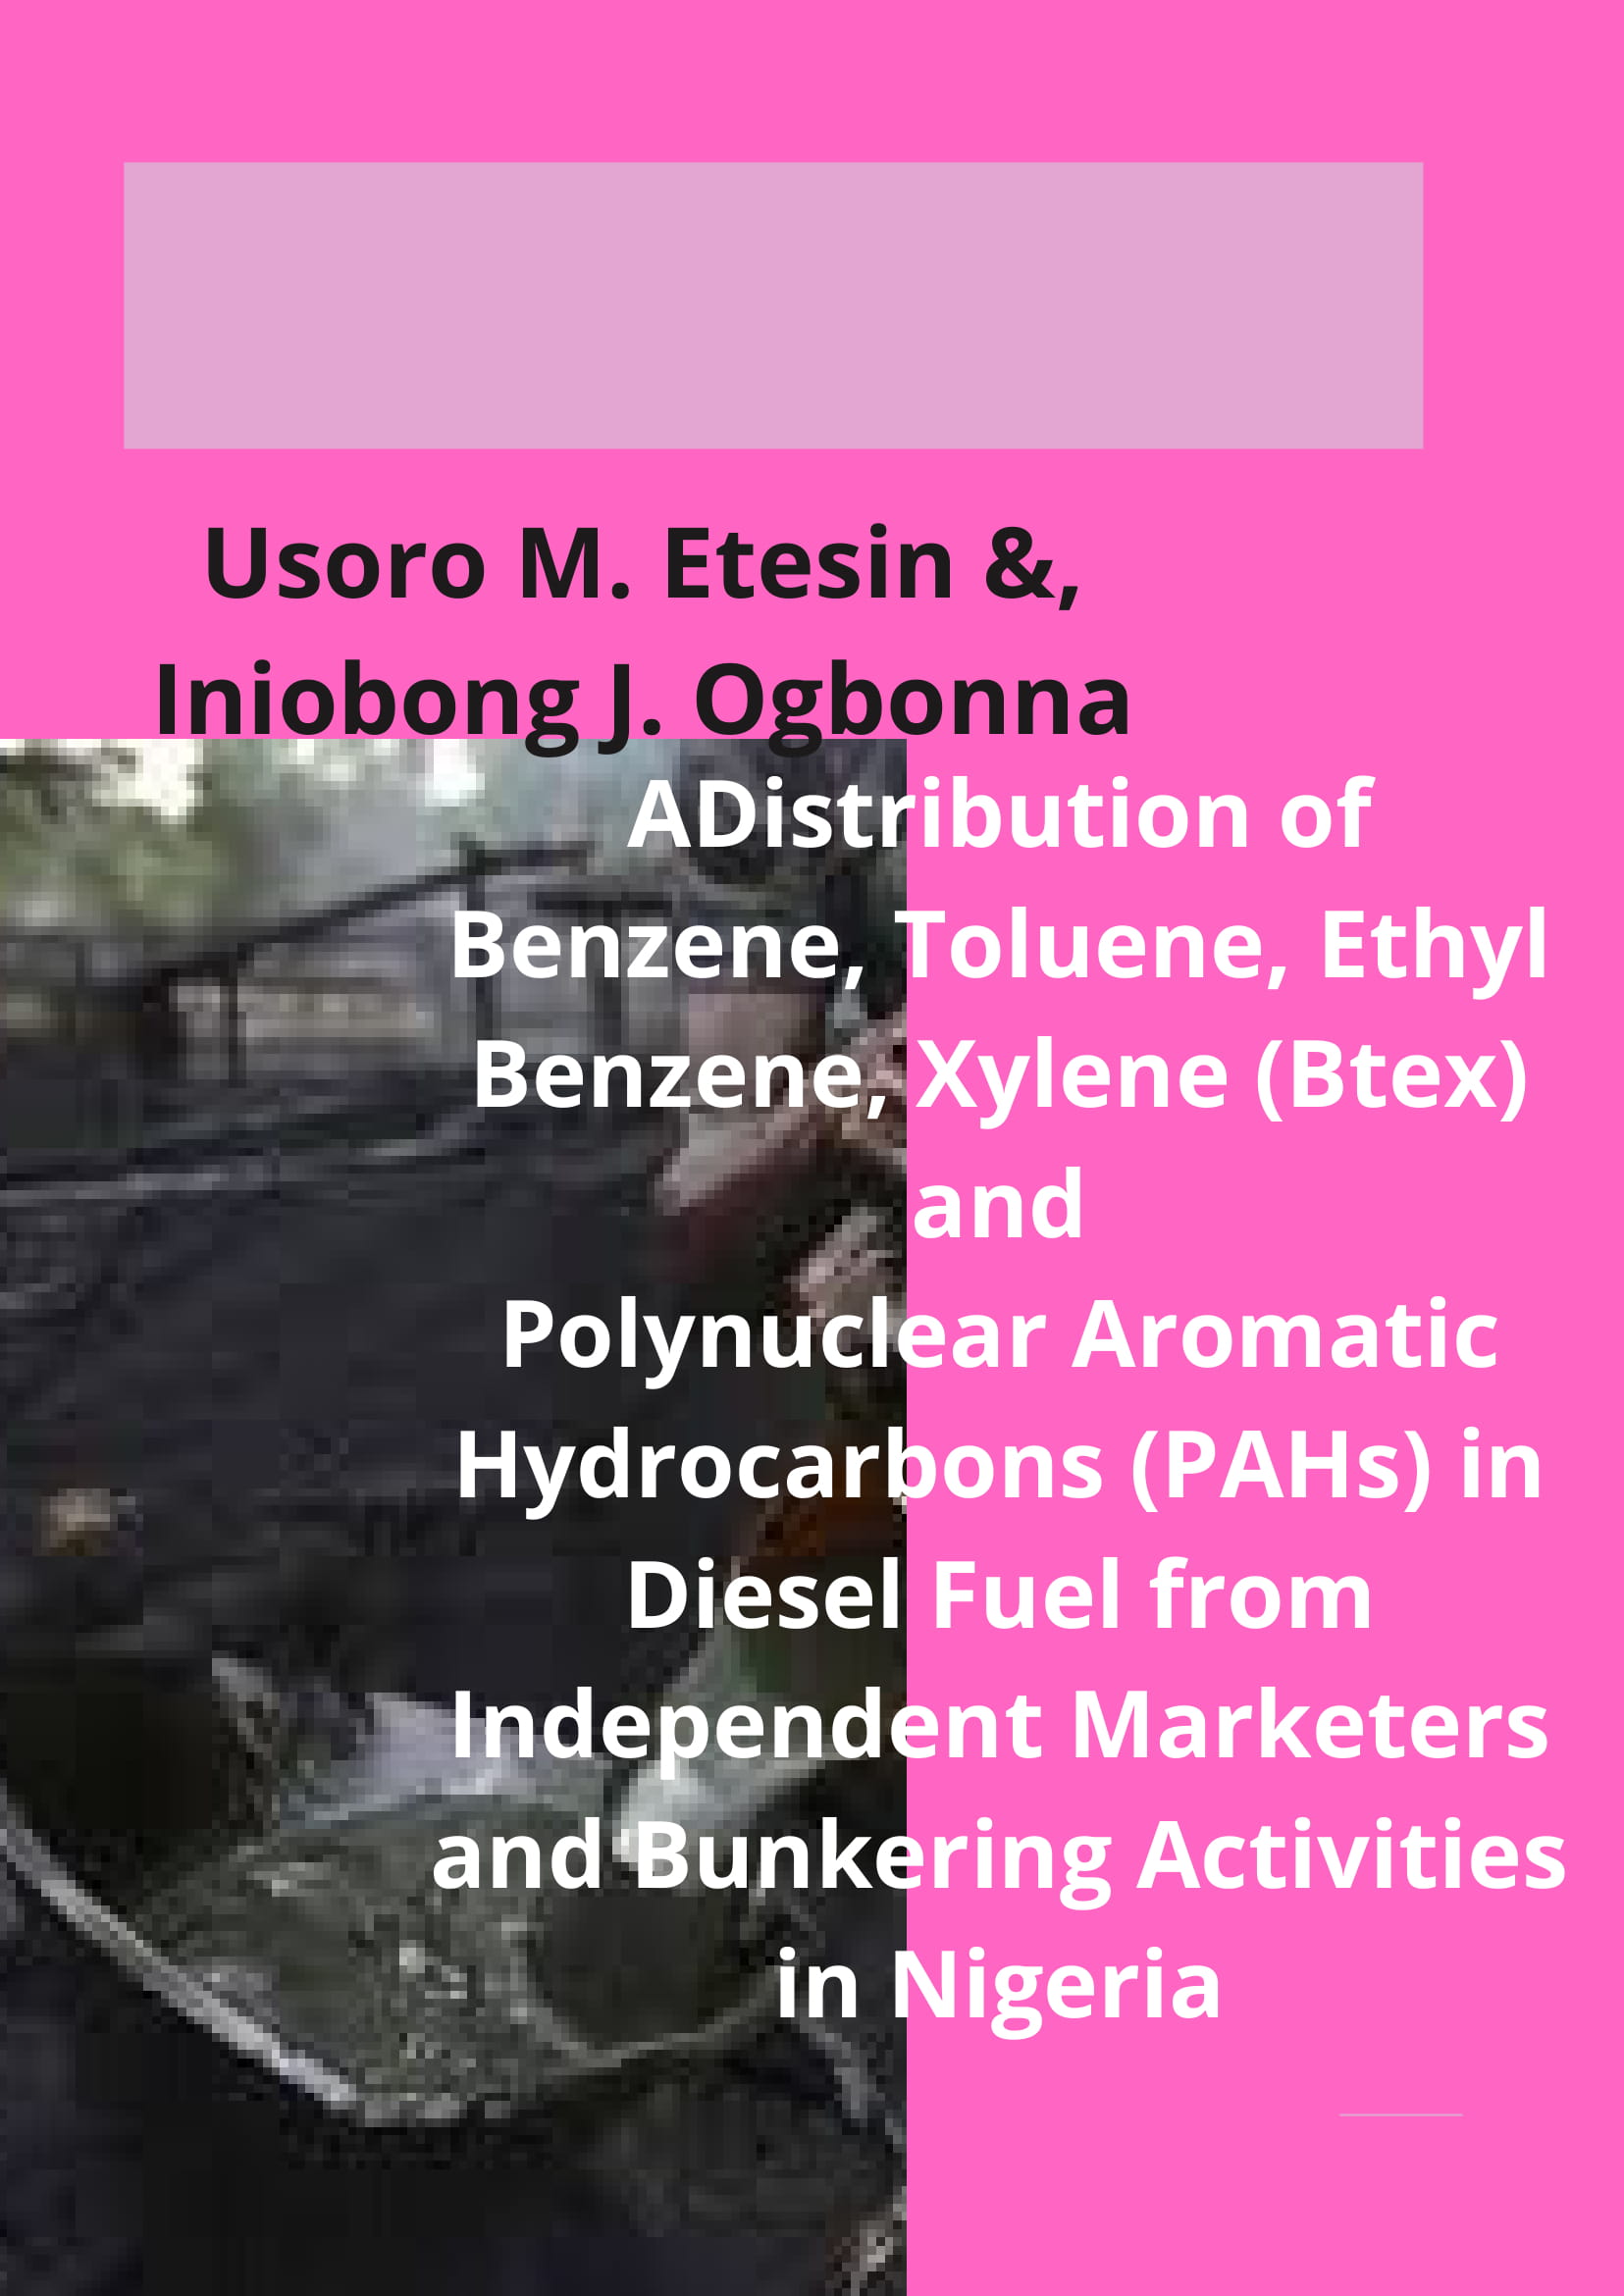 Distribution of Benzene, Toluene, Ethyl Benzene, Xylene (Btex) and Polynuclear Aromatic Hydrocarbons (PAHs) in Diesel Fuel from Independent Marketers and Bunkering Activities in Nigeria image